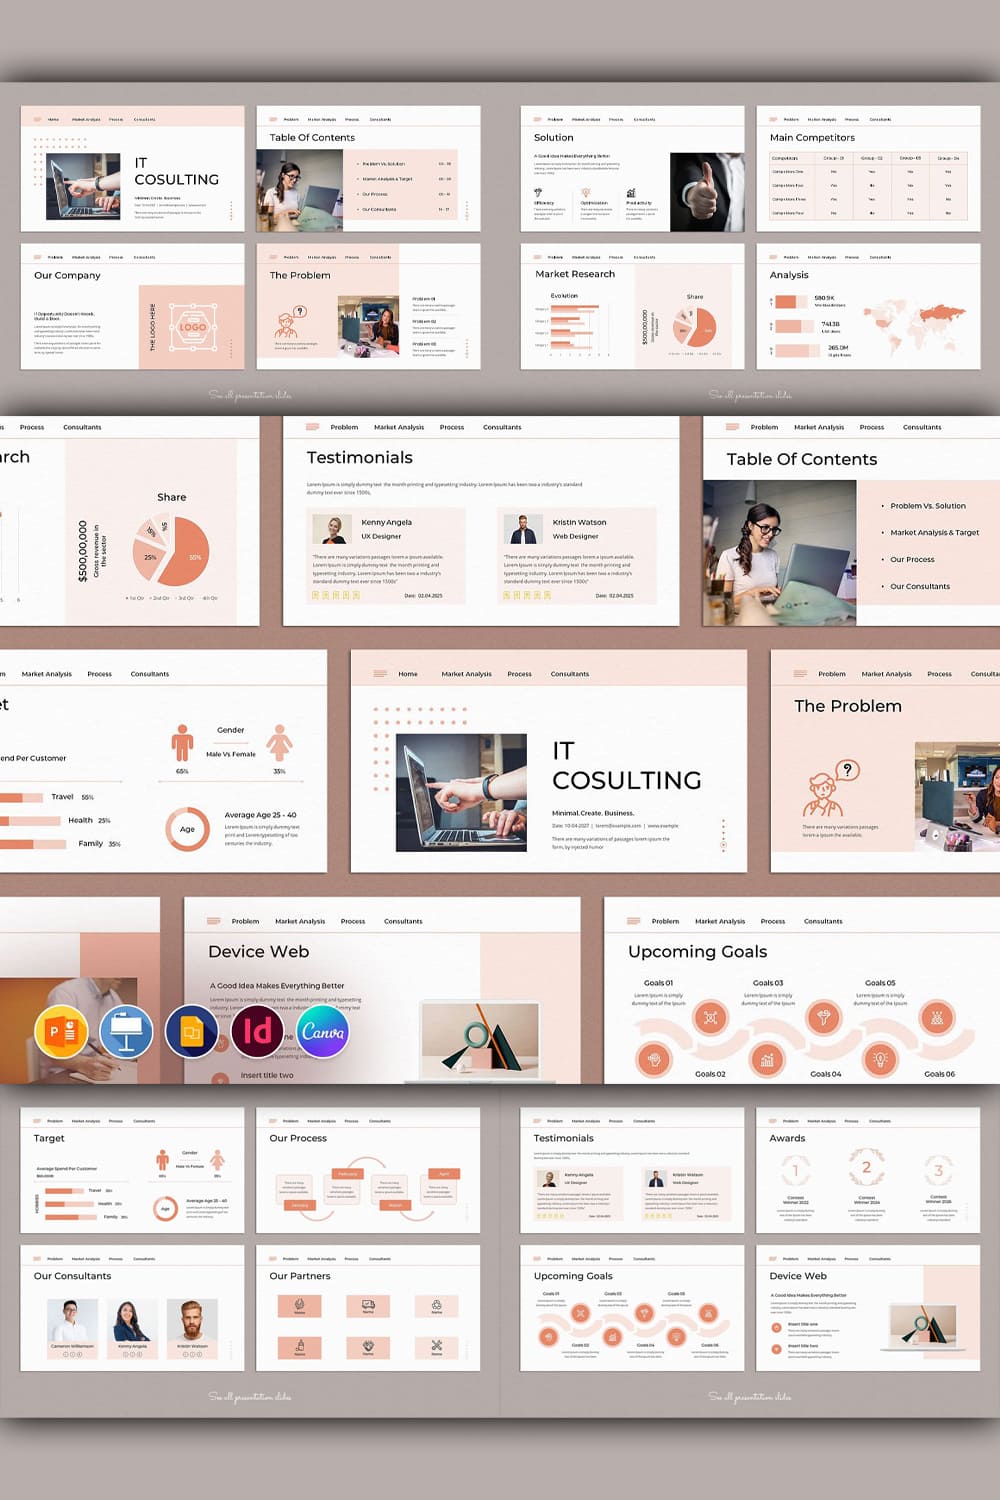 IT Consulting Presentation Template pinterest image.